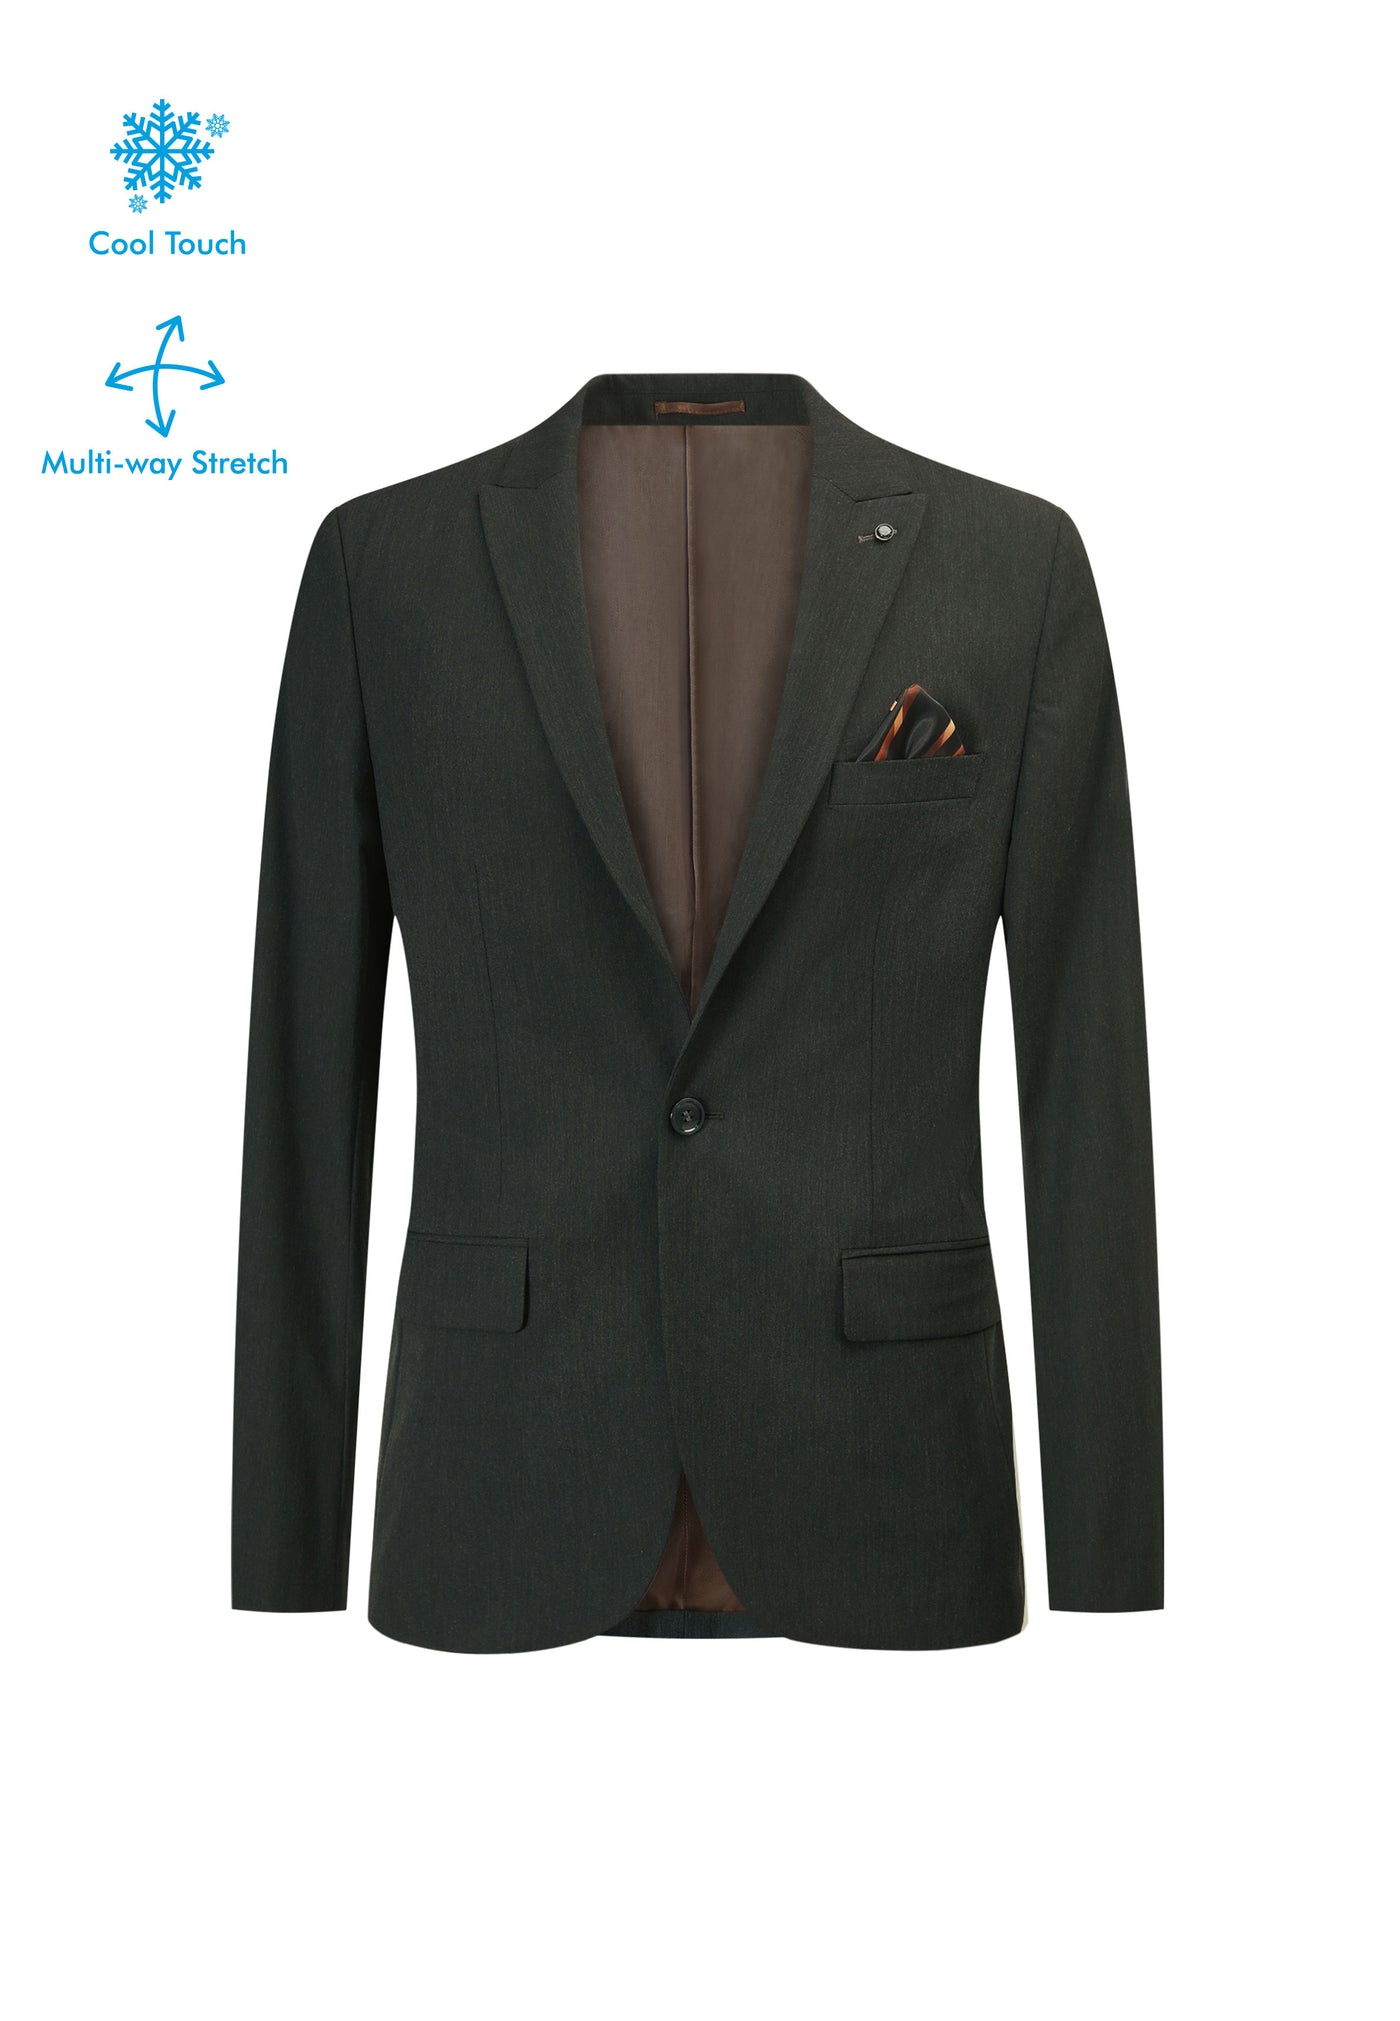 Men Clothing Cool Touch Multi-Way Stretch Suit Blazer Smart Fit